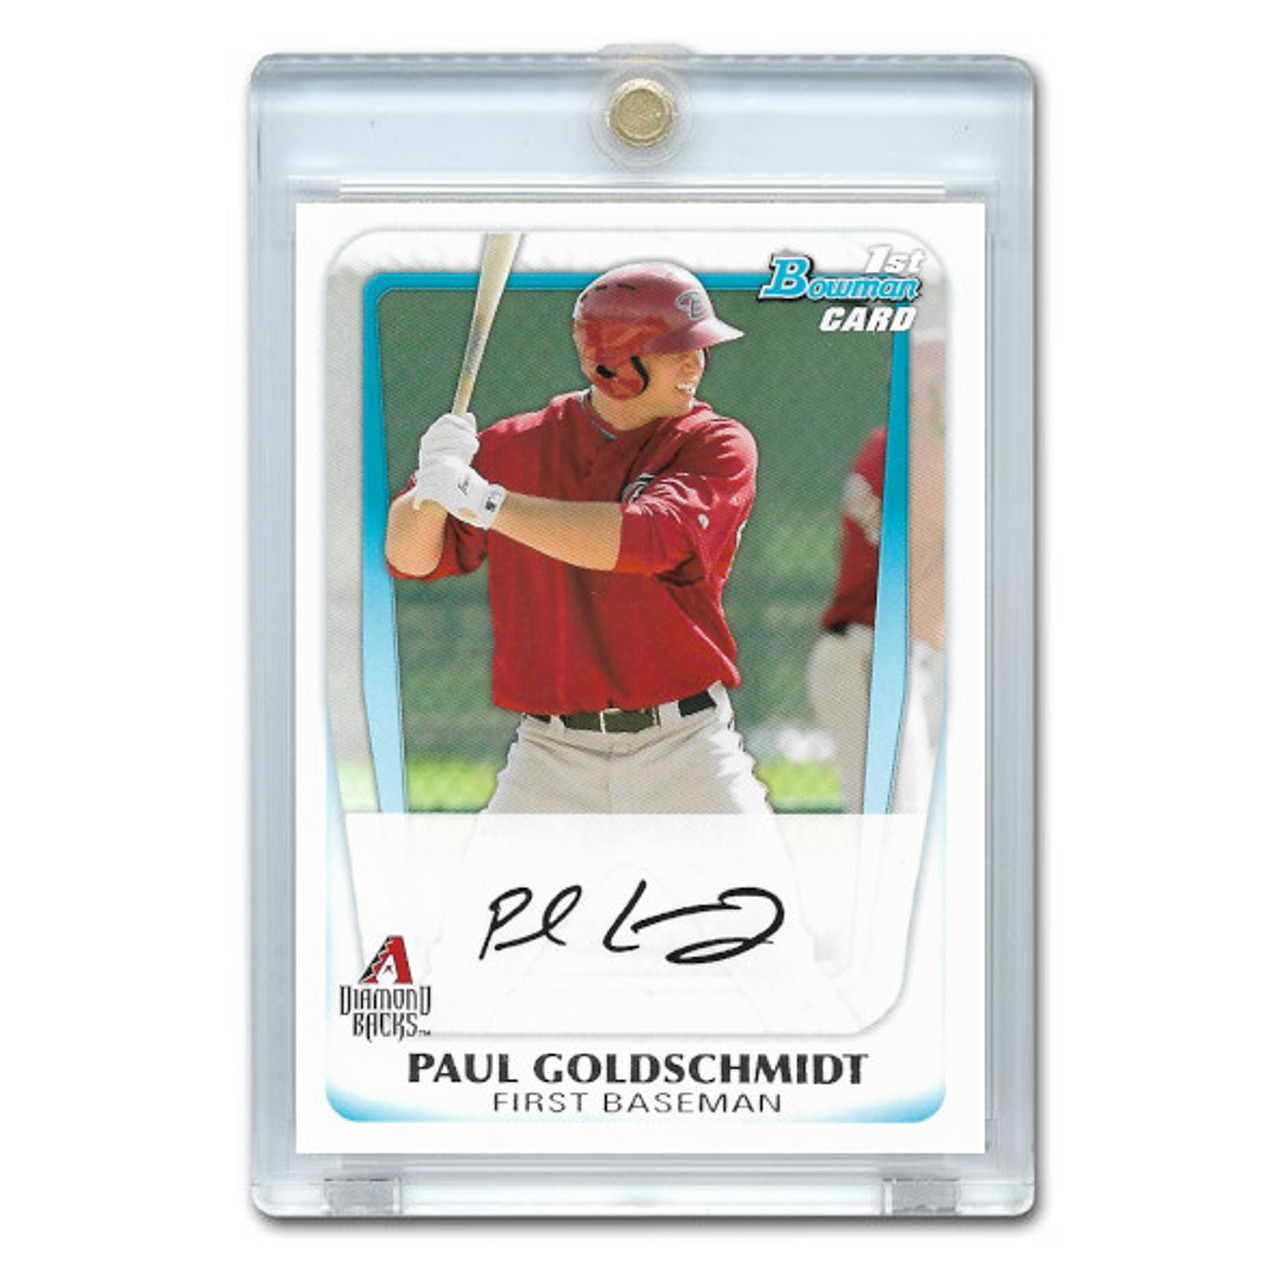 MLB Paul Goldschmidt Signed Trading Cards, Collectible Paul